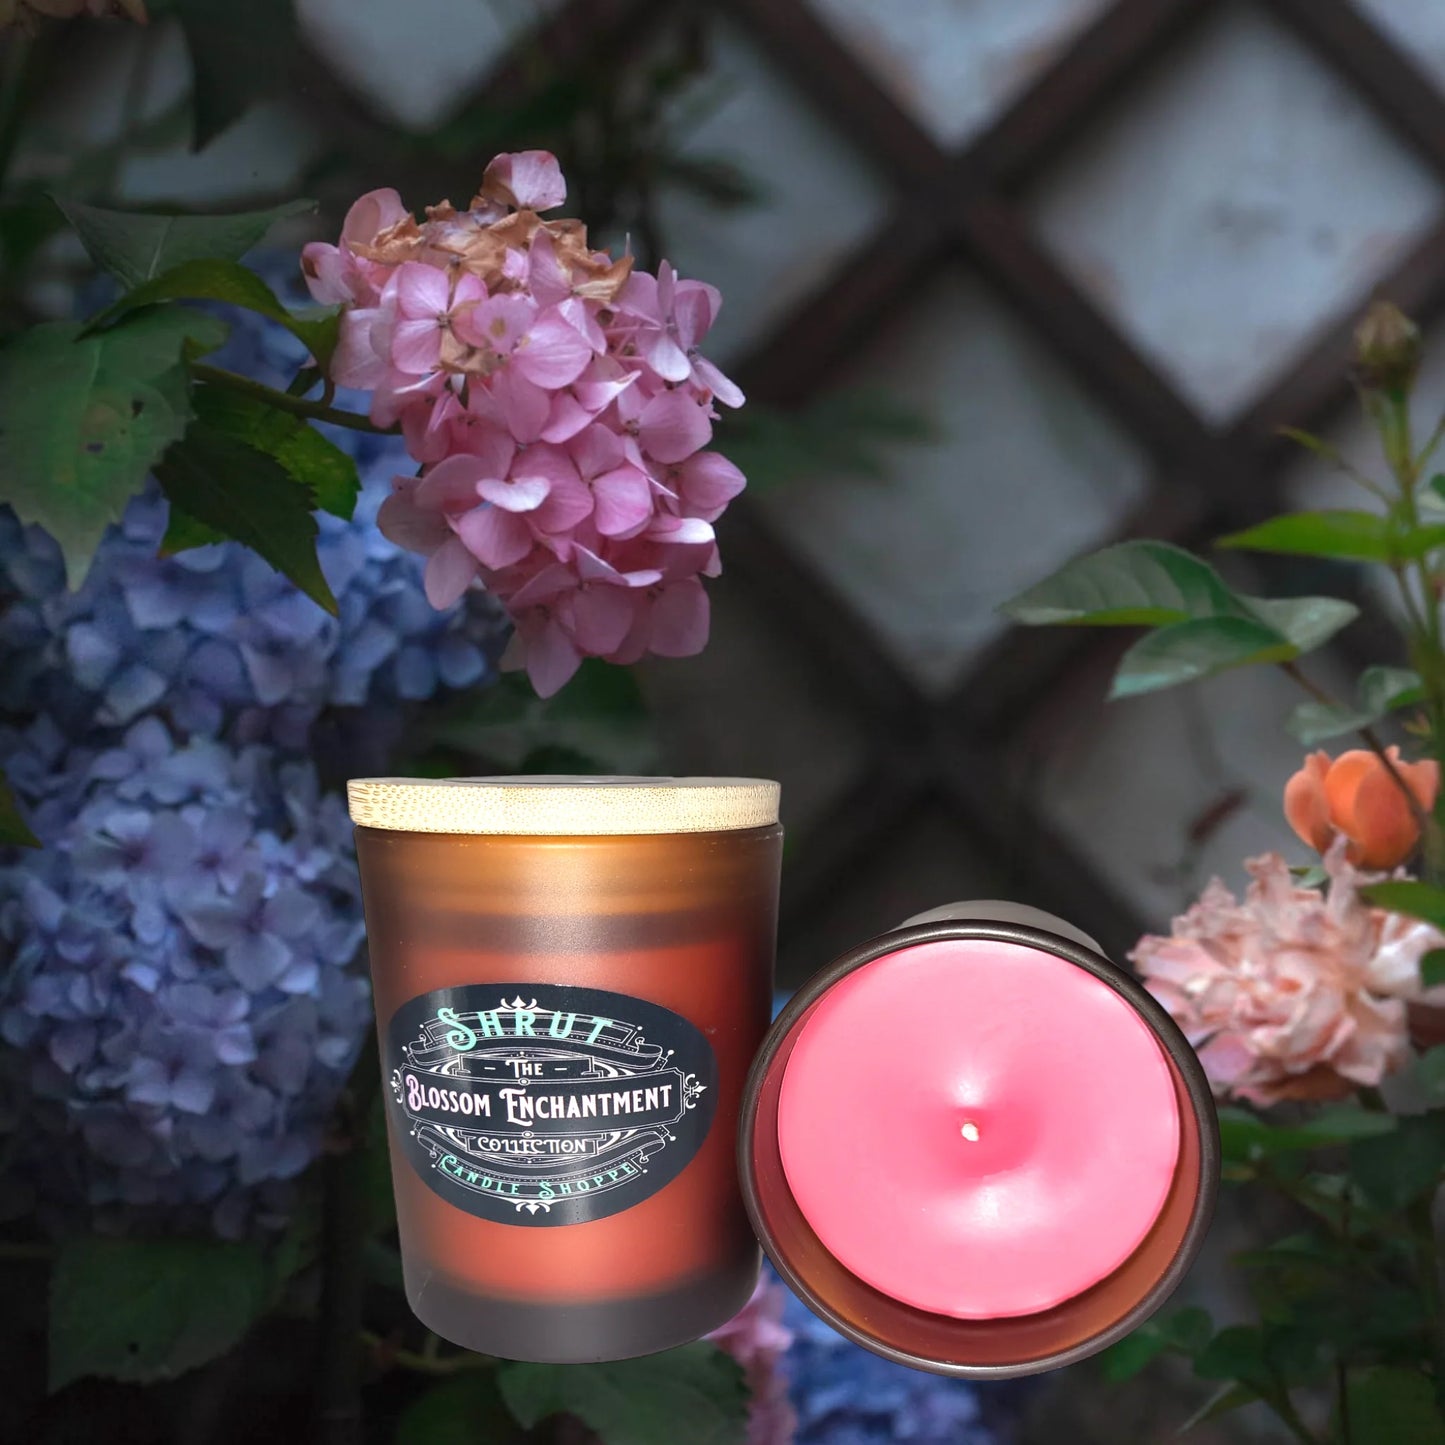 Blossom Enchantment: Love Potion in a Candle